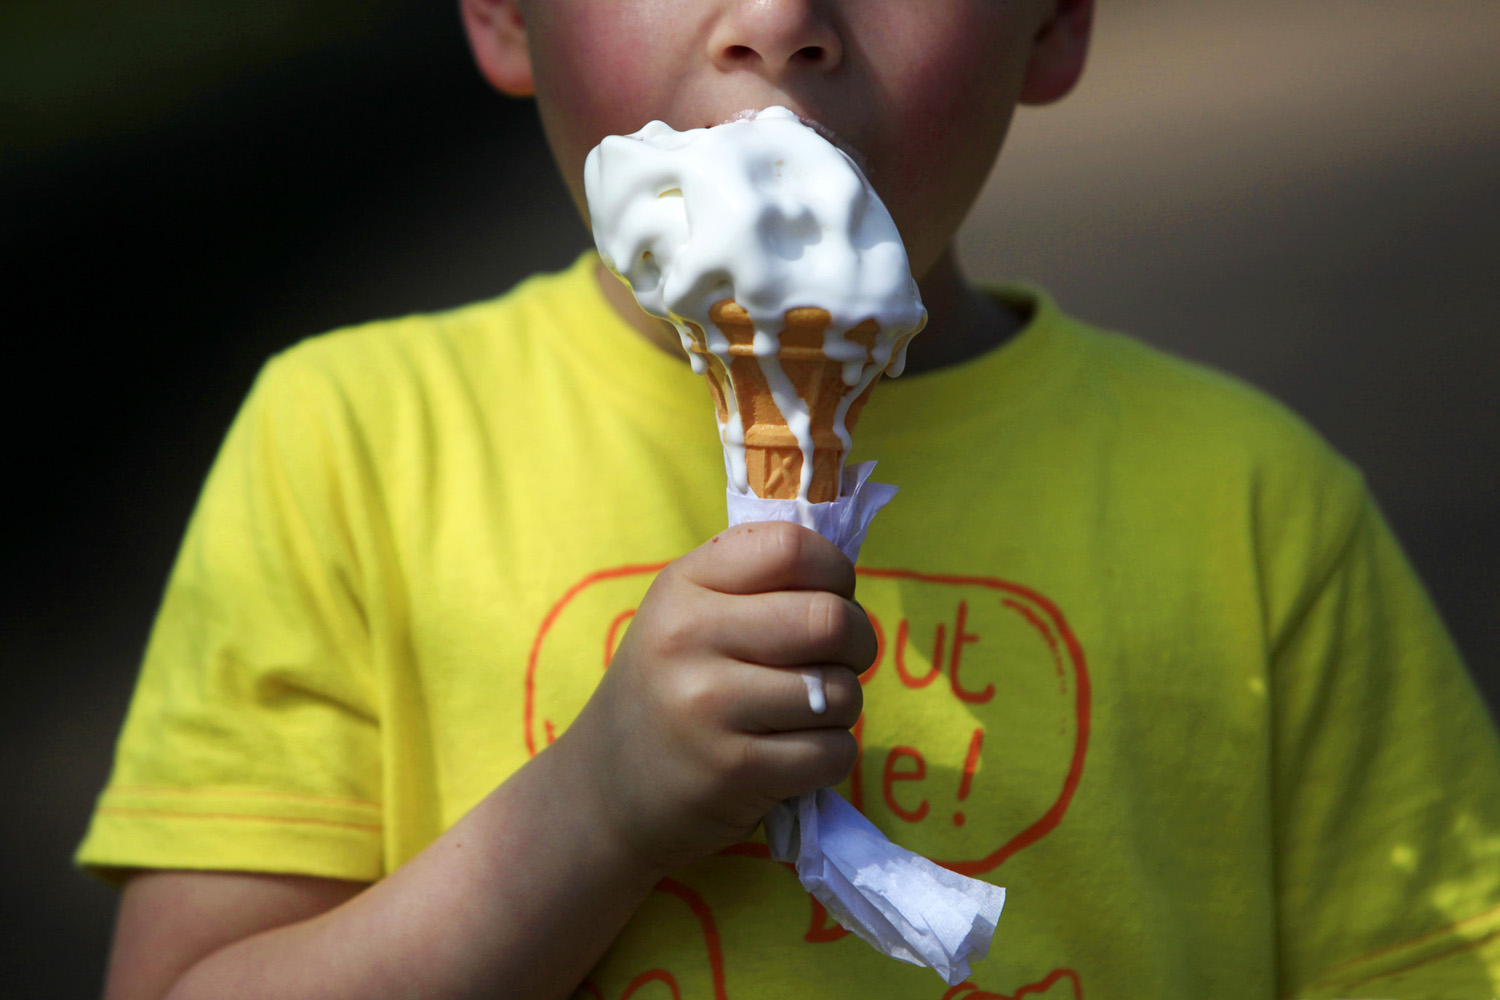 April 24, 2013. A child tucks into an ice cream during the warm weather and sunshine in St James Park, central London.